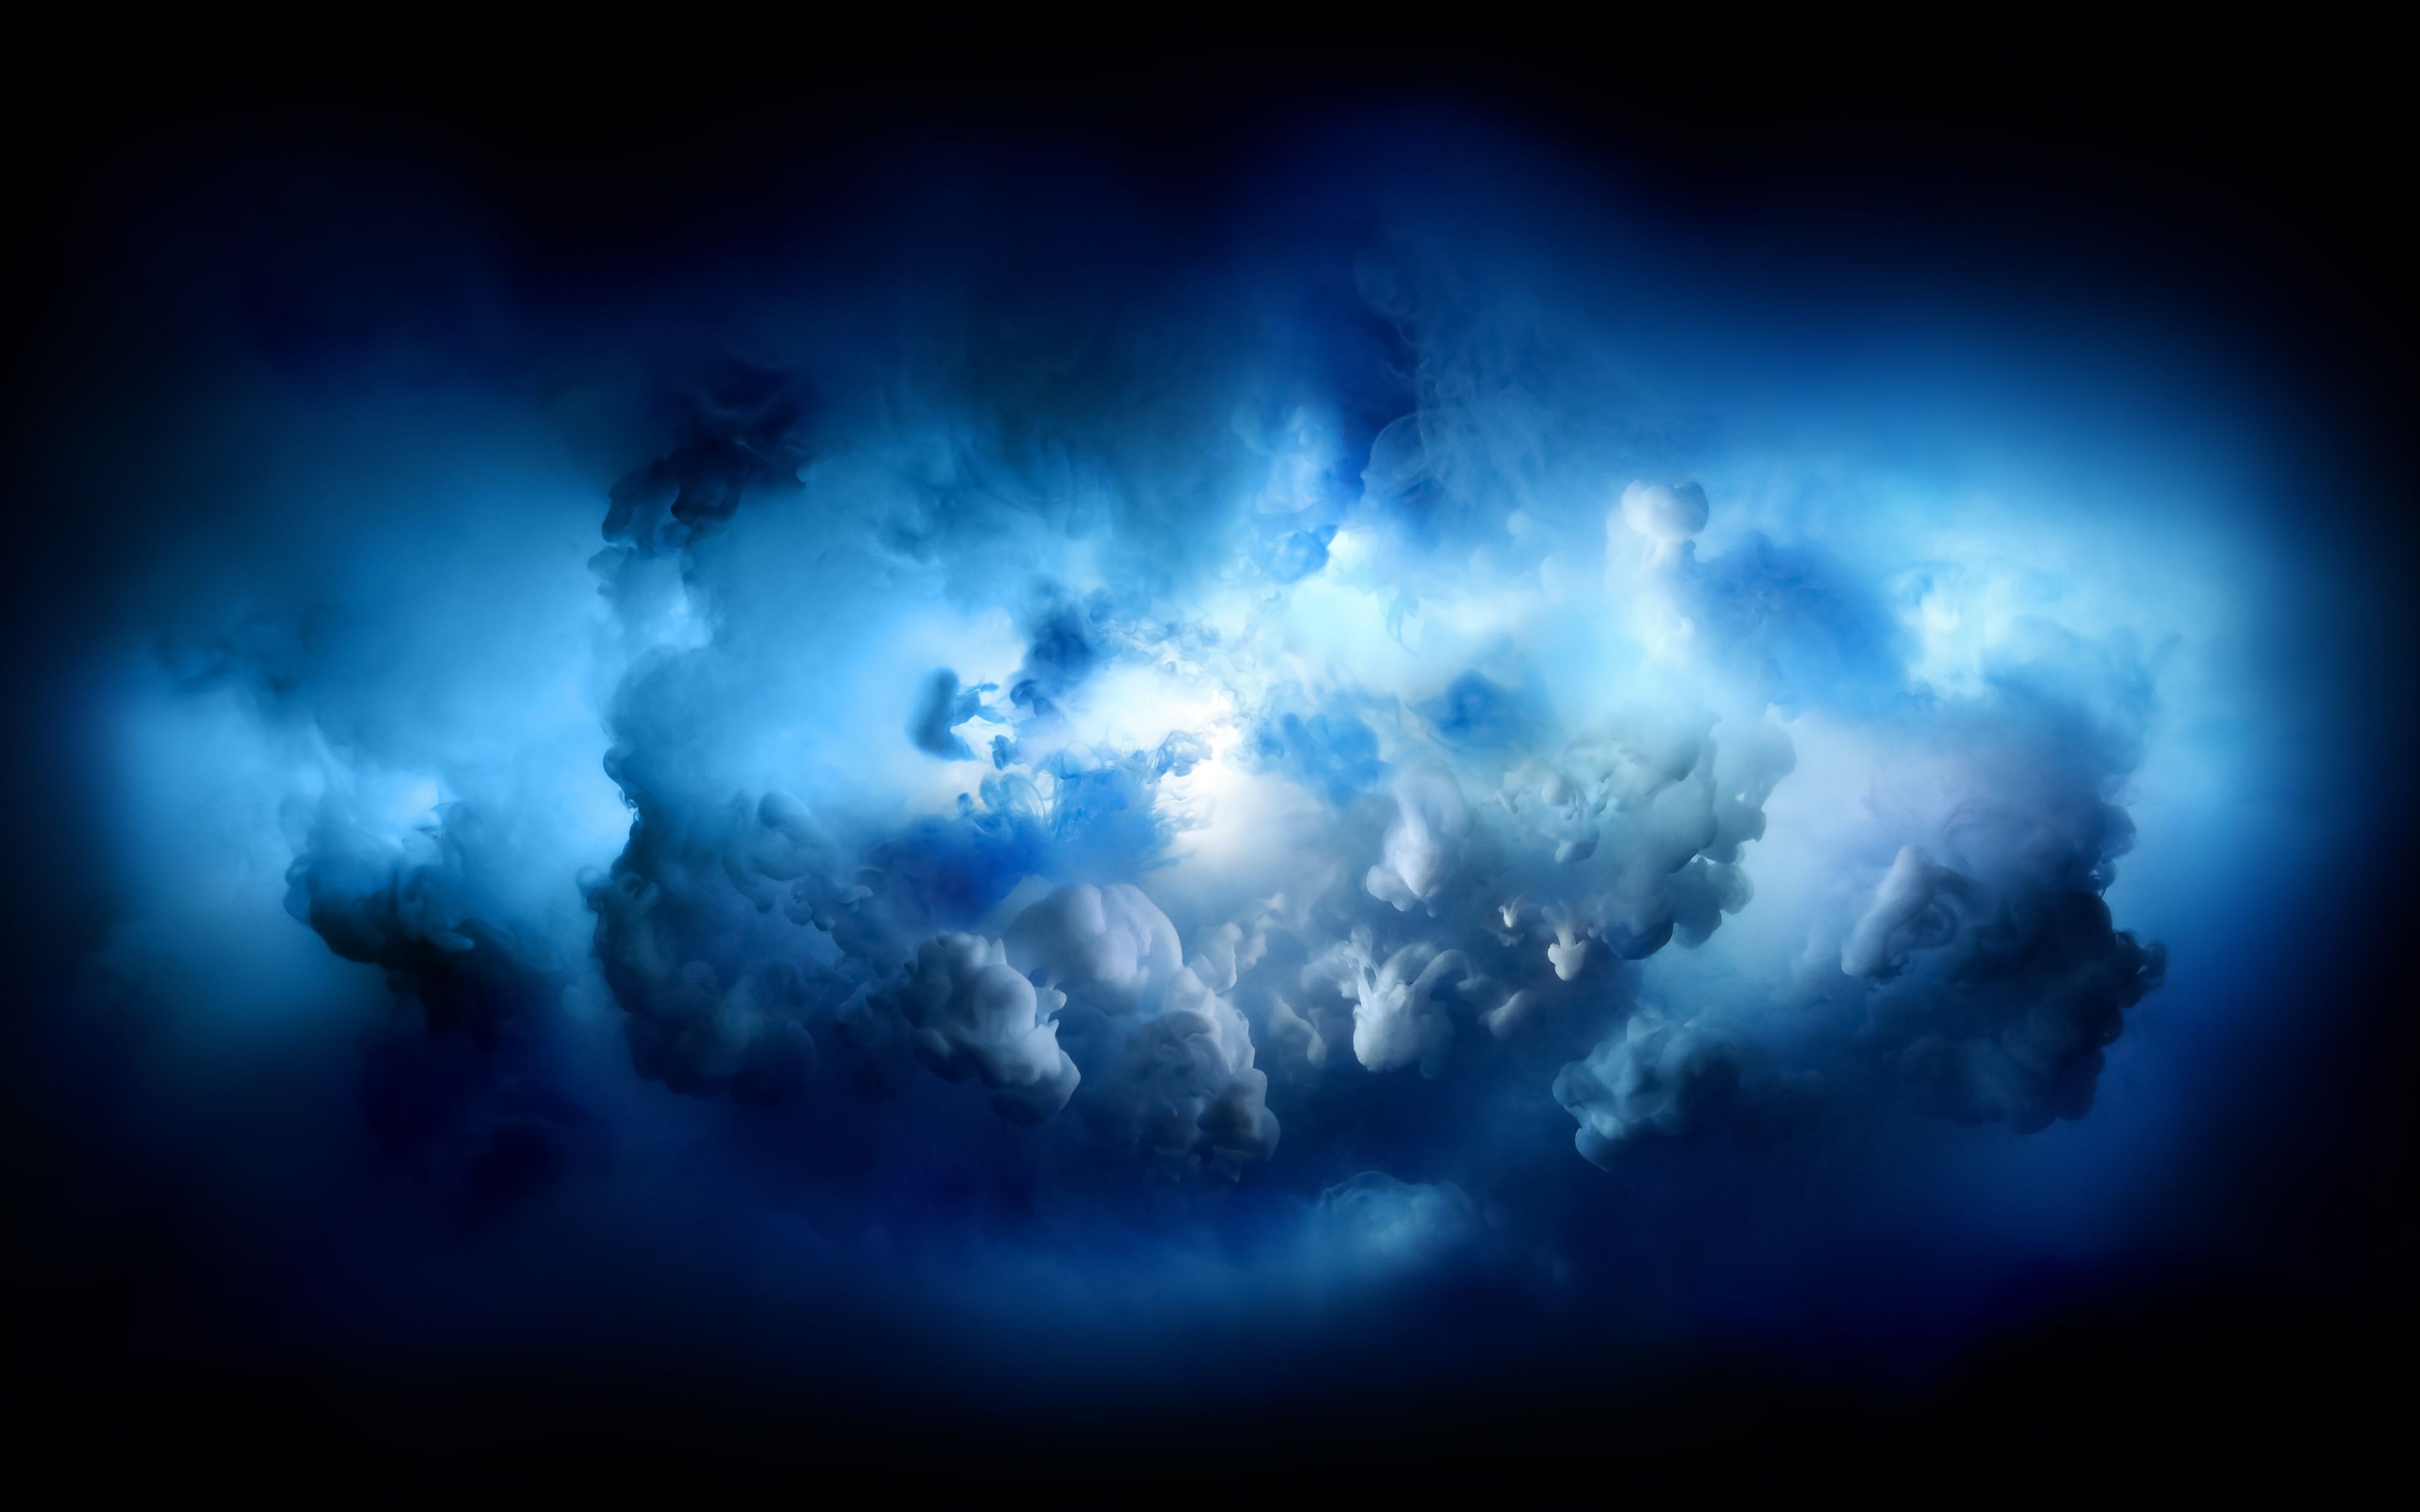 Download 3840x2400 wallpaper dark, blue and white clouds, 4k, ultra HD 16: widescreen, 3840x2400 HD image, background, 2043